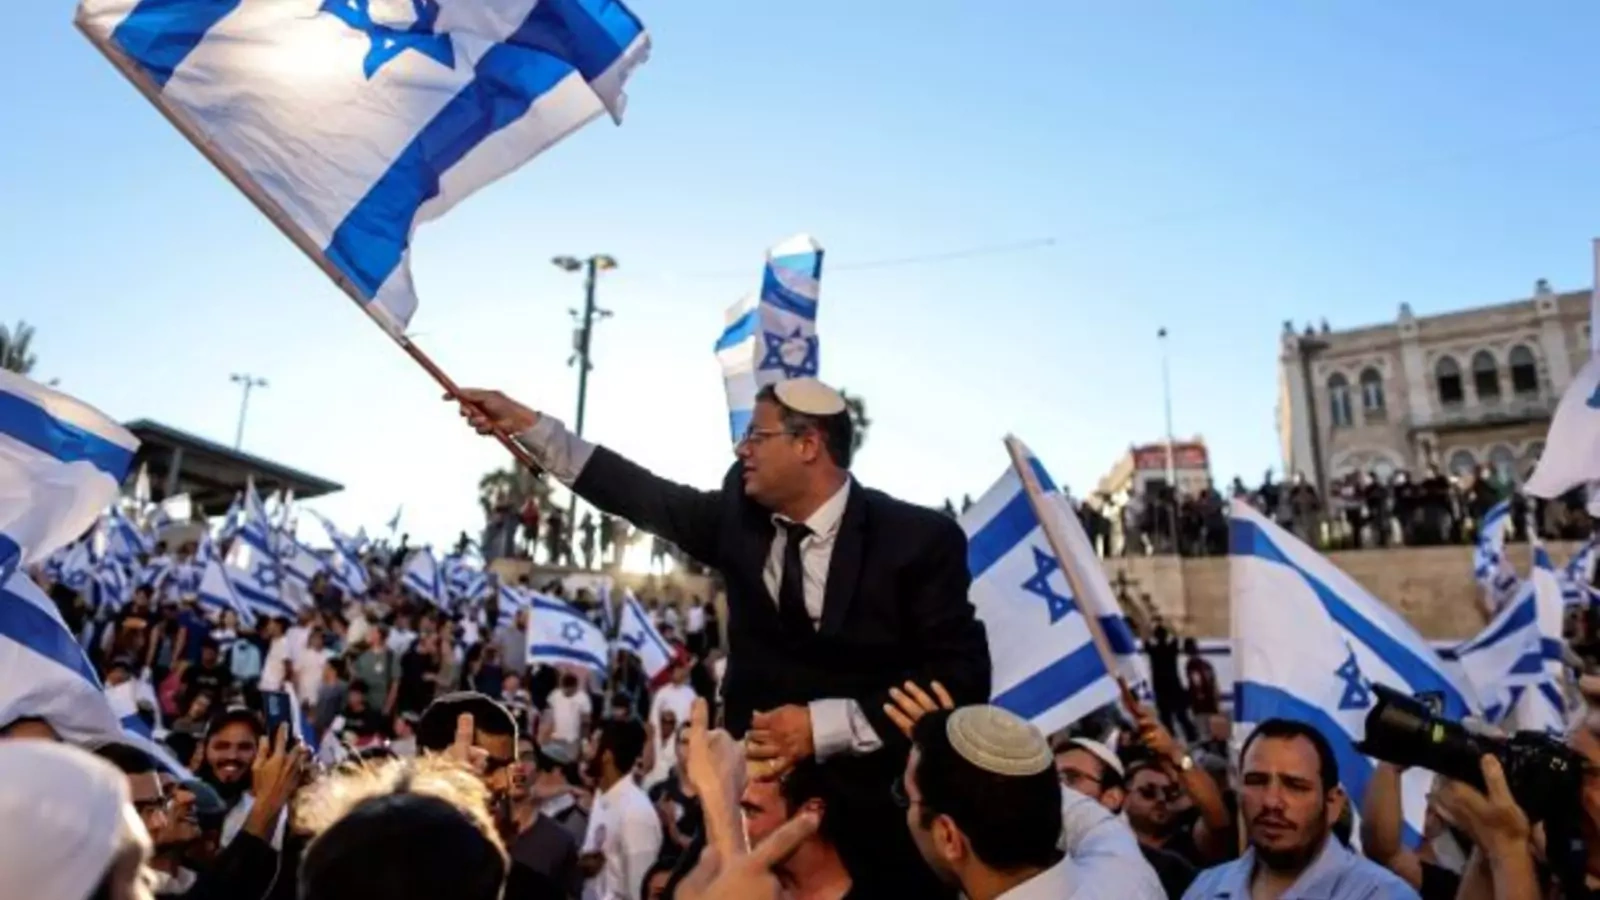 Israeli lawmaker Itamar Ben Gvir carries an Israeli flag as he dances together with others by Damascus gate just outside Jerusalem's Old City June 15, 2021.